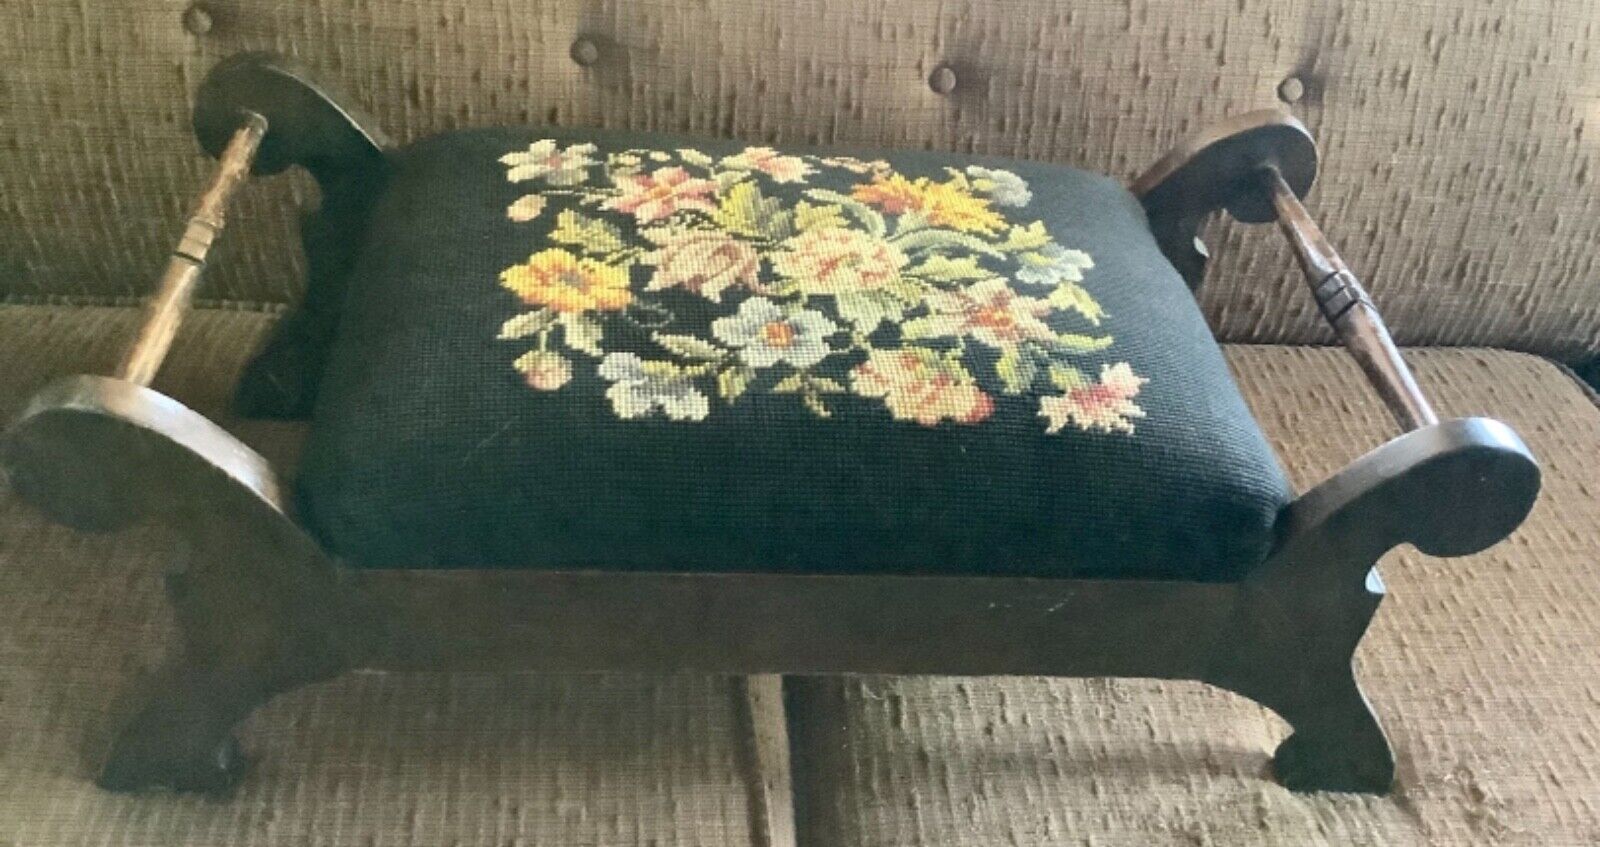 Vtg Wood Needlepoint Cross Stitch Top Foot Stool Bench Rest Decor Seat Floral